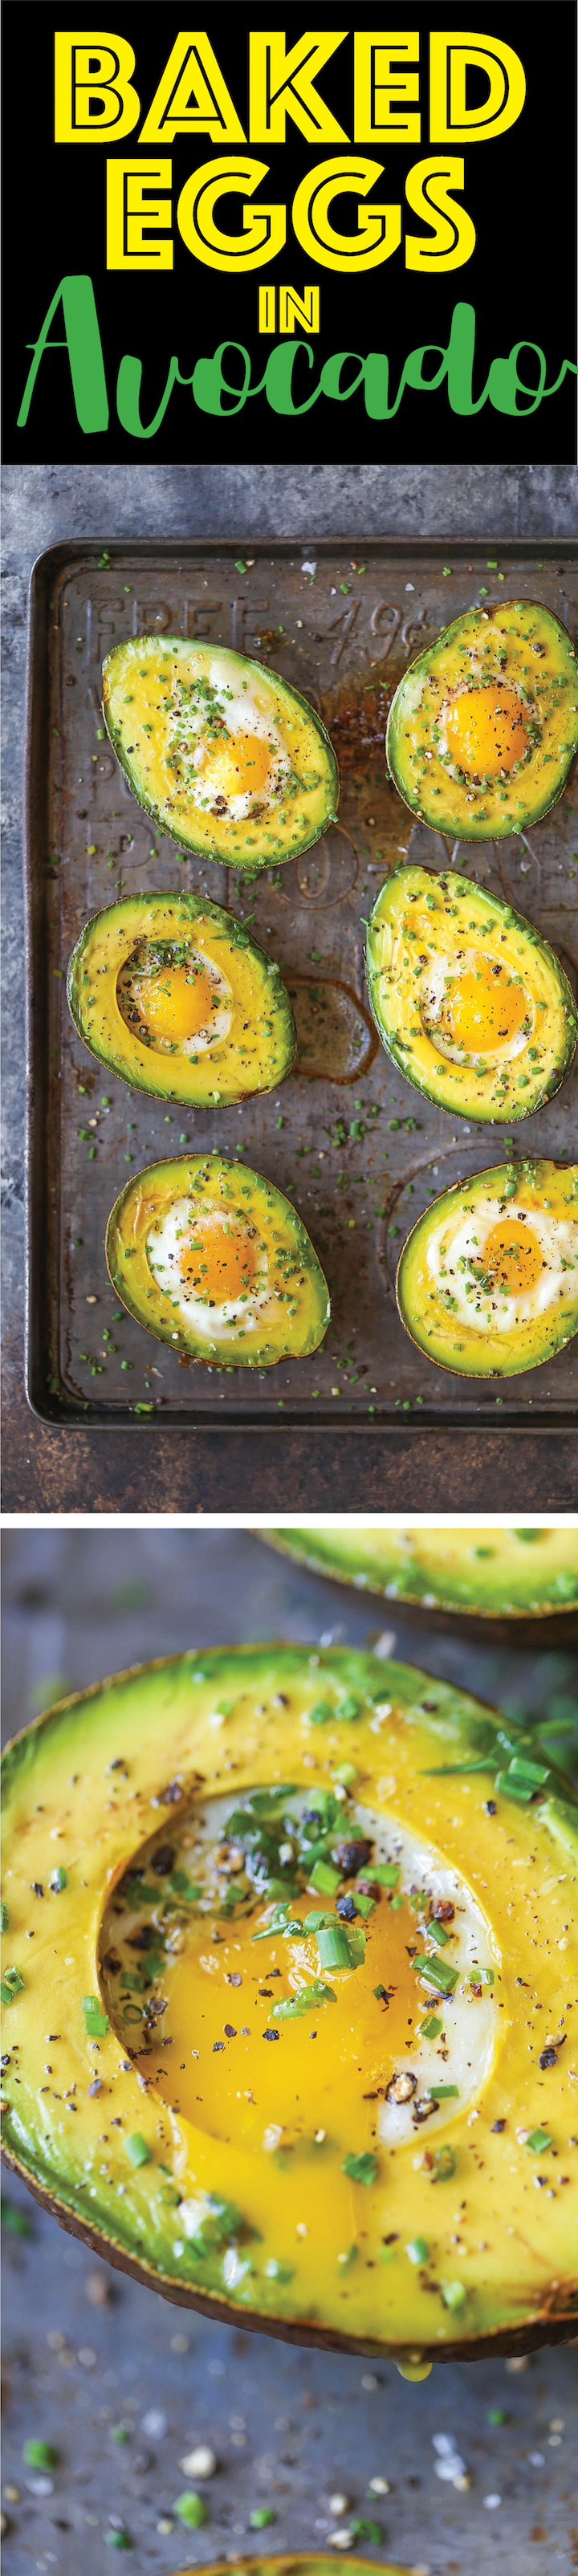 Baked Eggs in Avocado - Who would have thought? You can bake your eggs right in avocado halves for a healthy breakfast option to start your day off right!